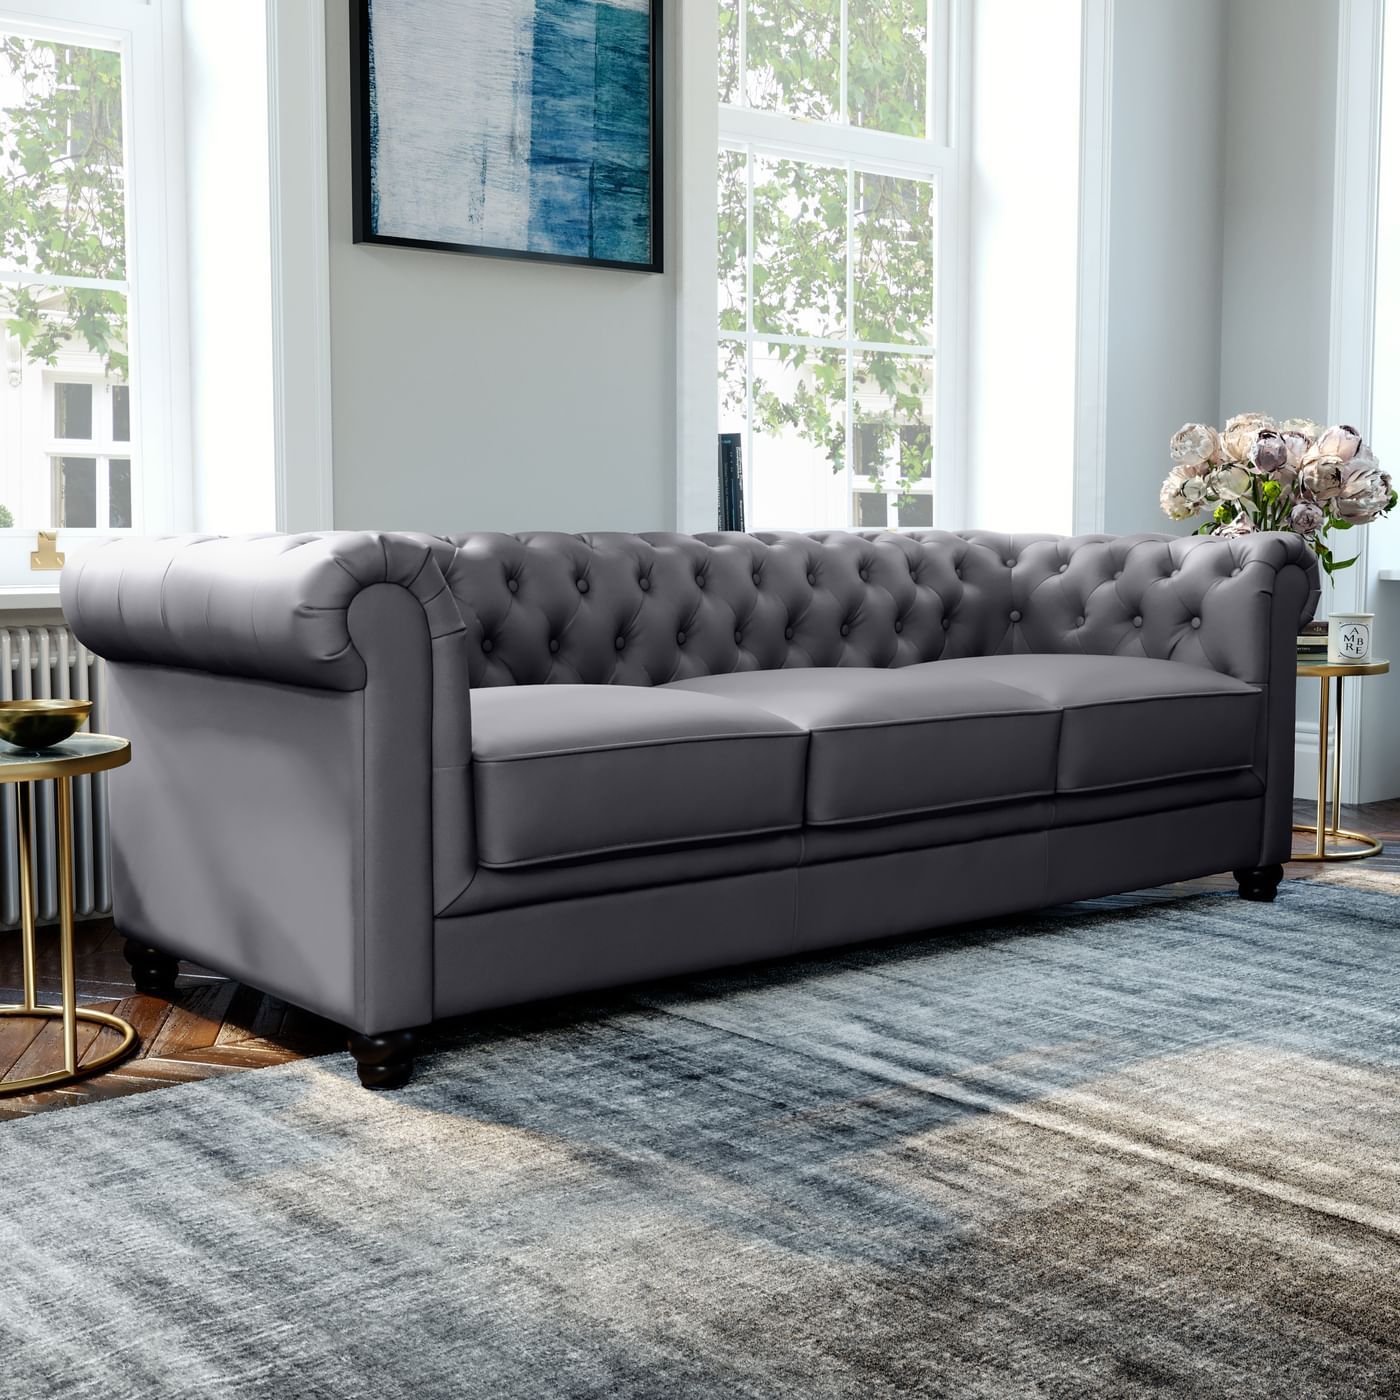 Hampton Grey Leather 3 Seater Chesterfield Sofa | Furniture Choice Inside Chesterfield Sofas (Gallery 20 of 21)